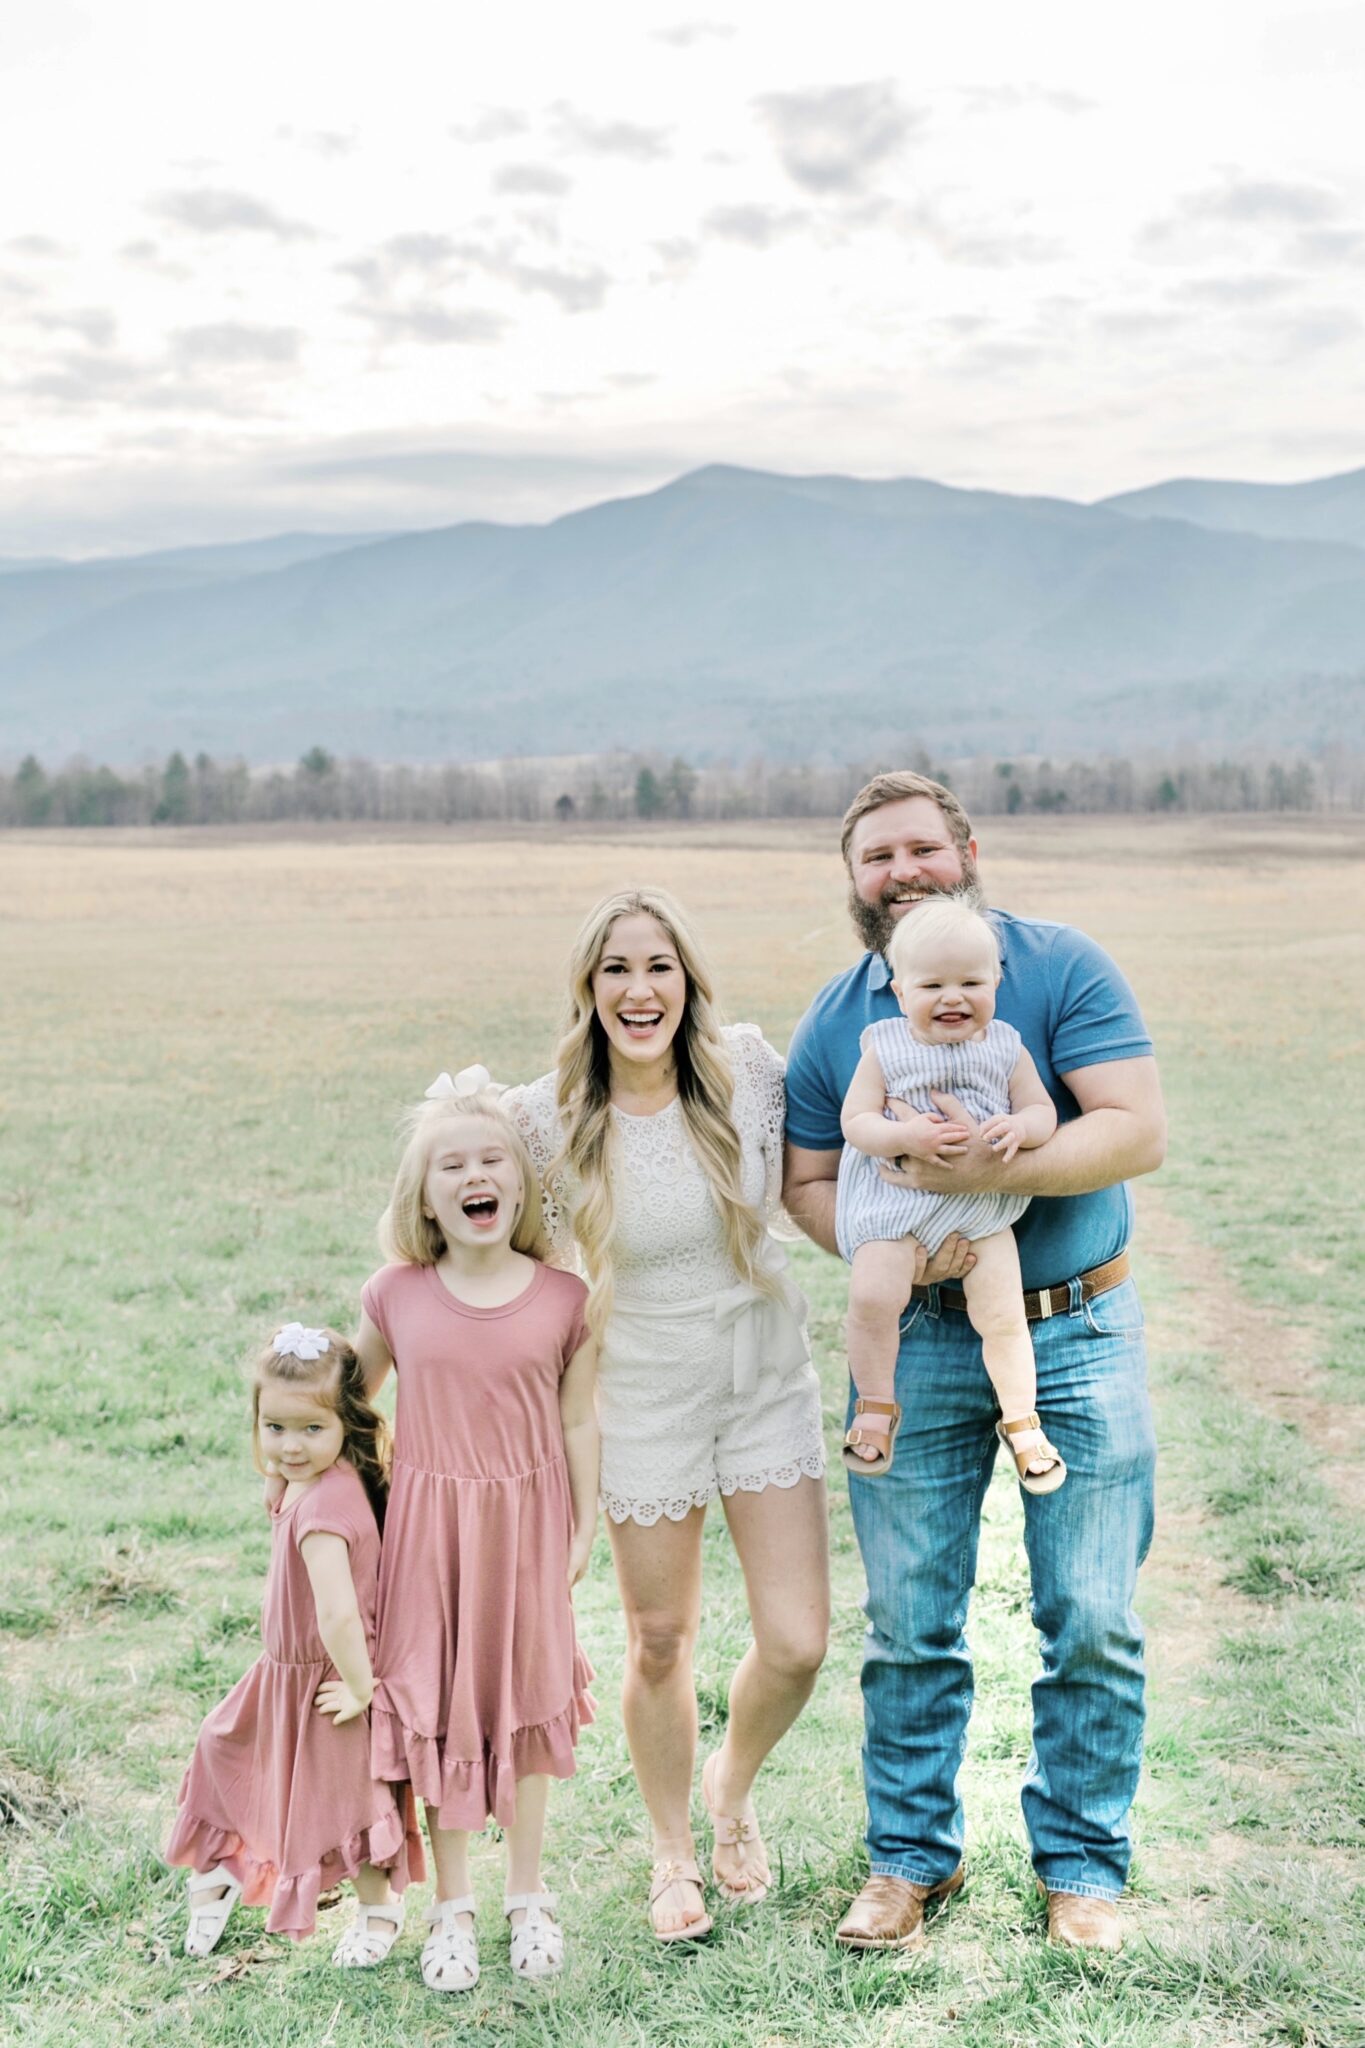 How to take great Easter family pictures, tips by top US lifestyle blogger, Walking in Memphis in High Heels.